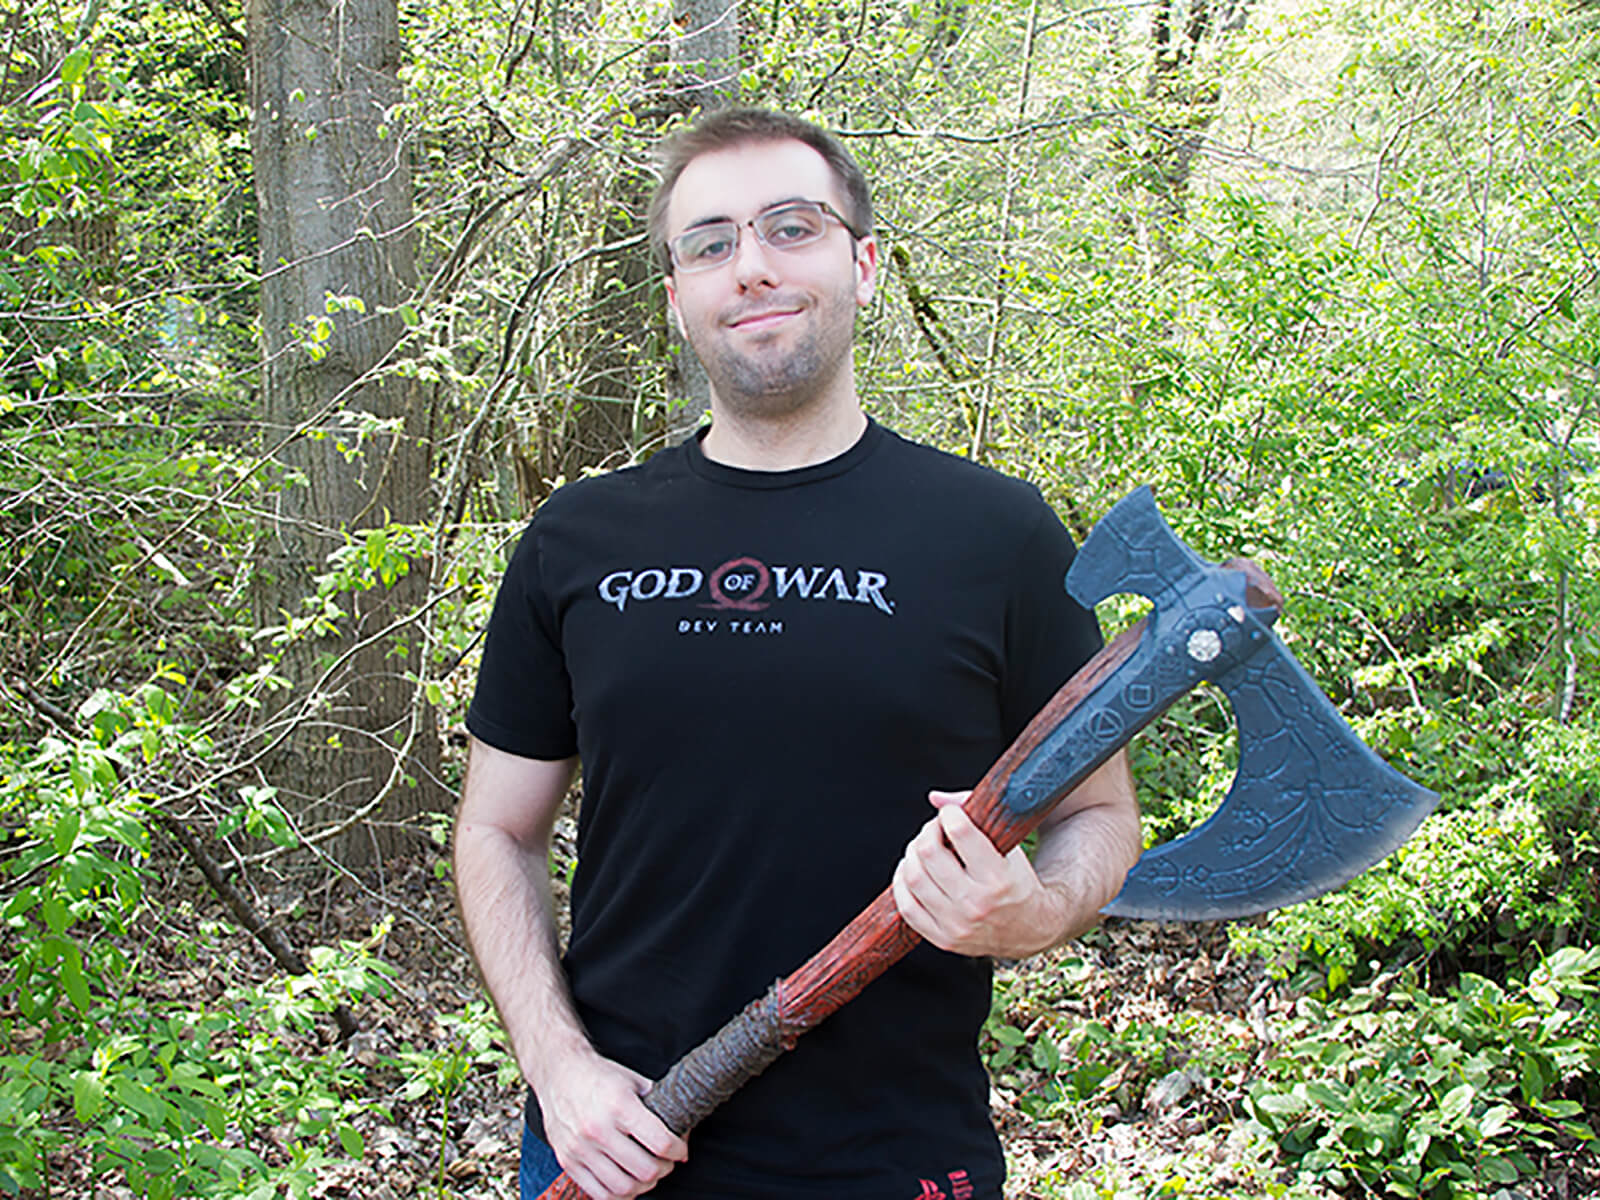 DigiPen alumni Ryan Baker poses with a fake ax on the DigiPen campus